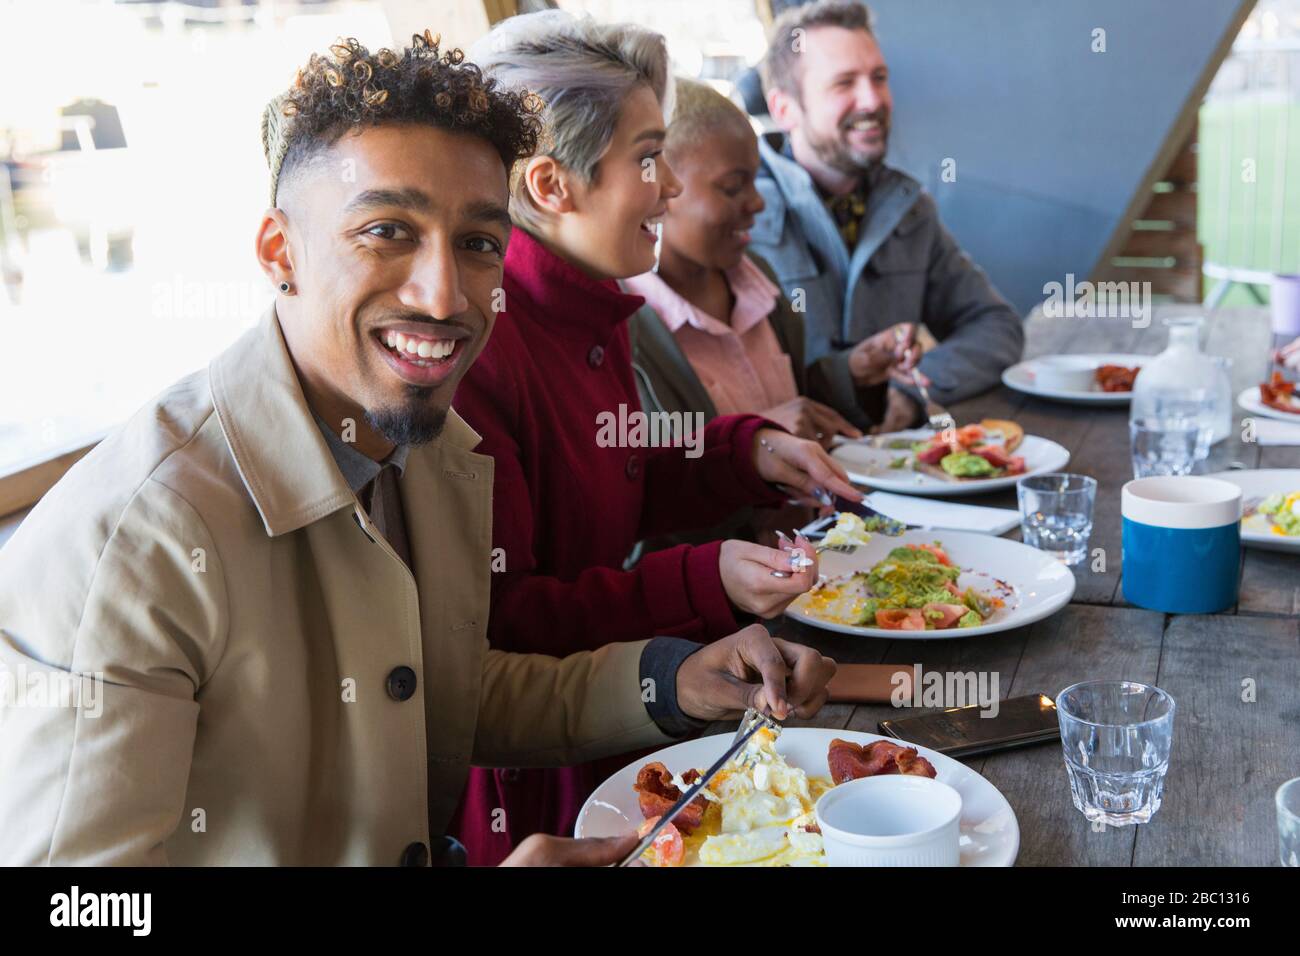 Portrait smiling young man eating breakfast with friends at restaurant outdoor patio Stock Photo